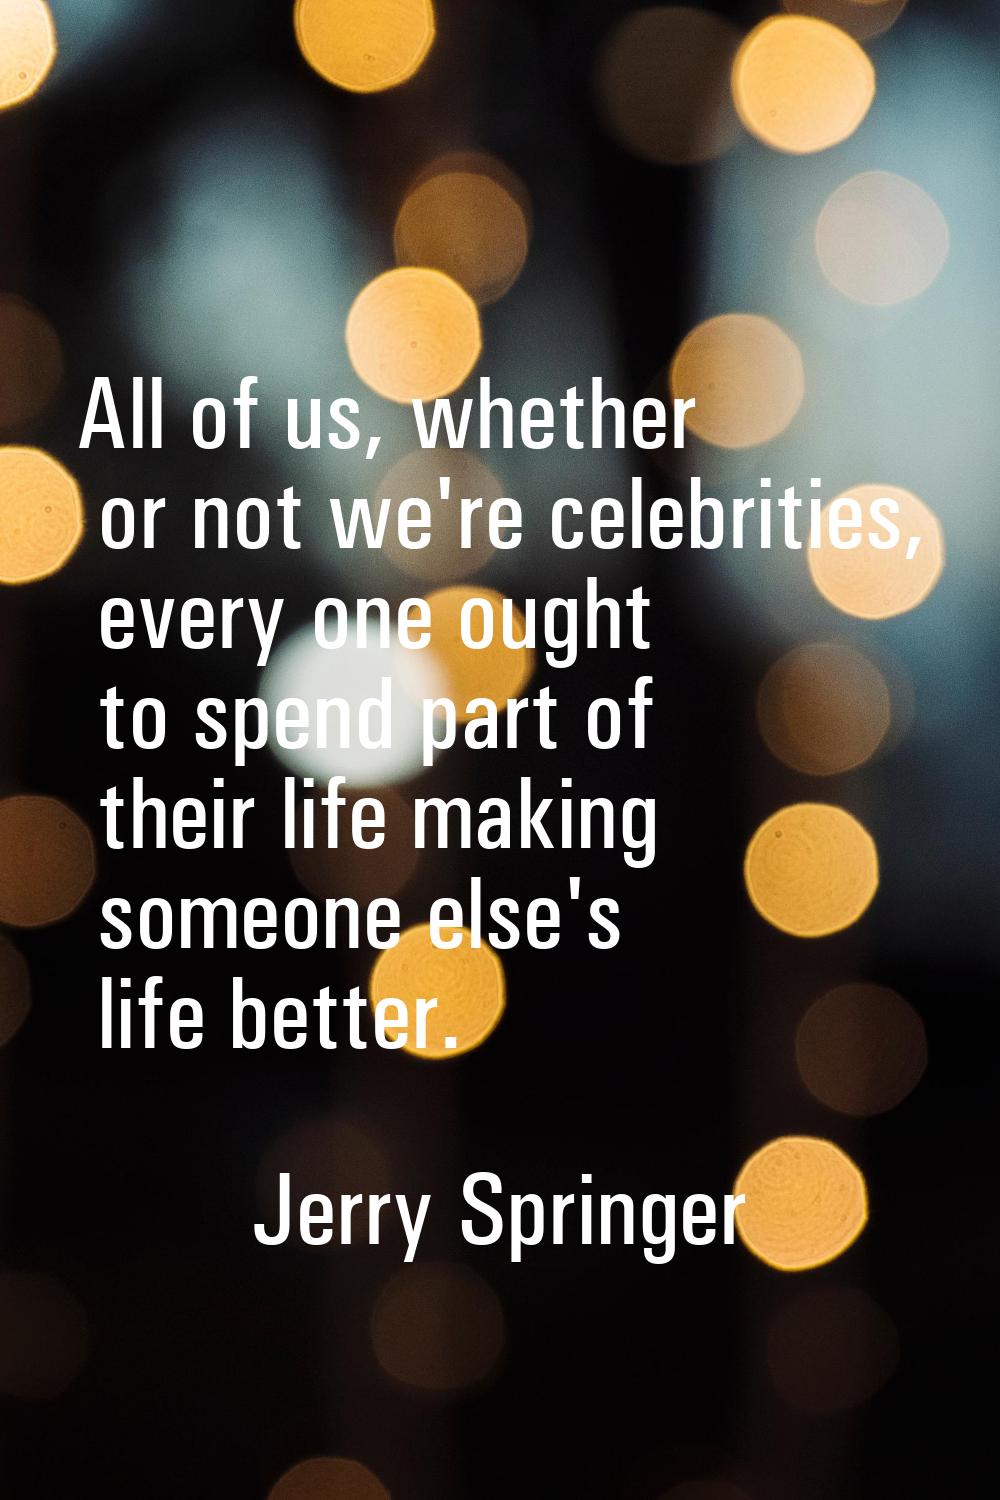 All of us, whether or not we're celebrities, every one ought to spend part of their life making som